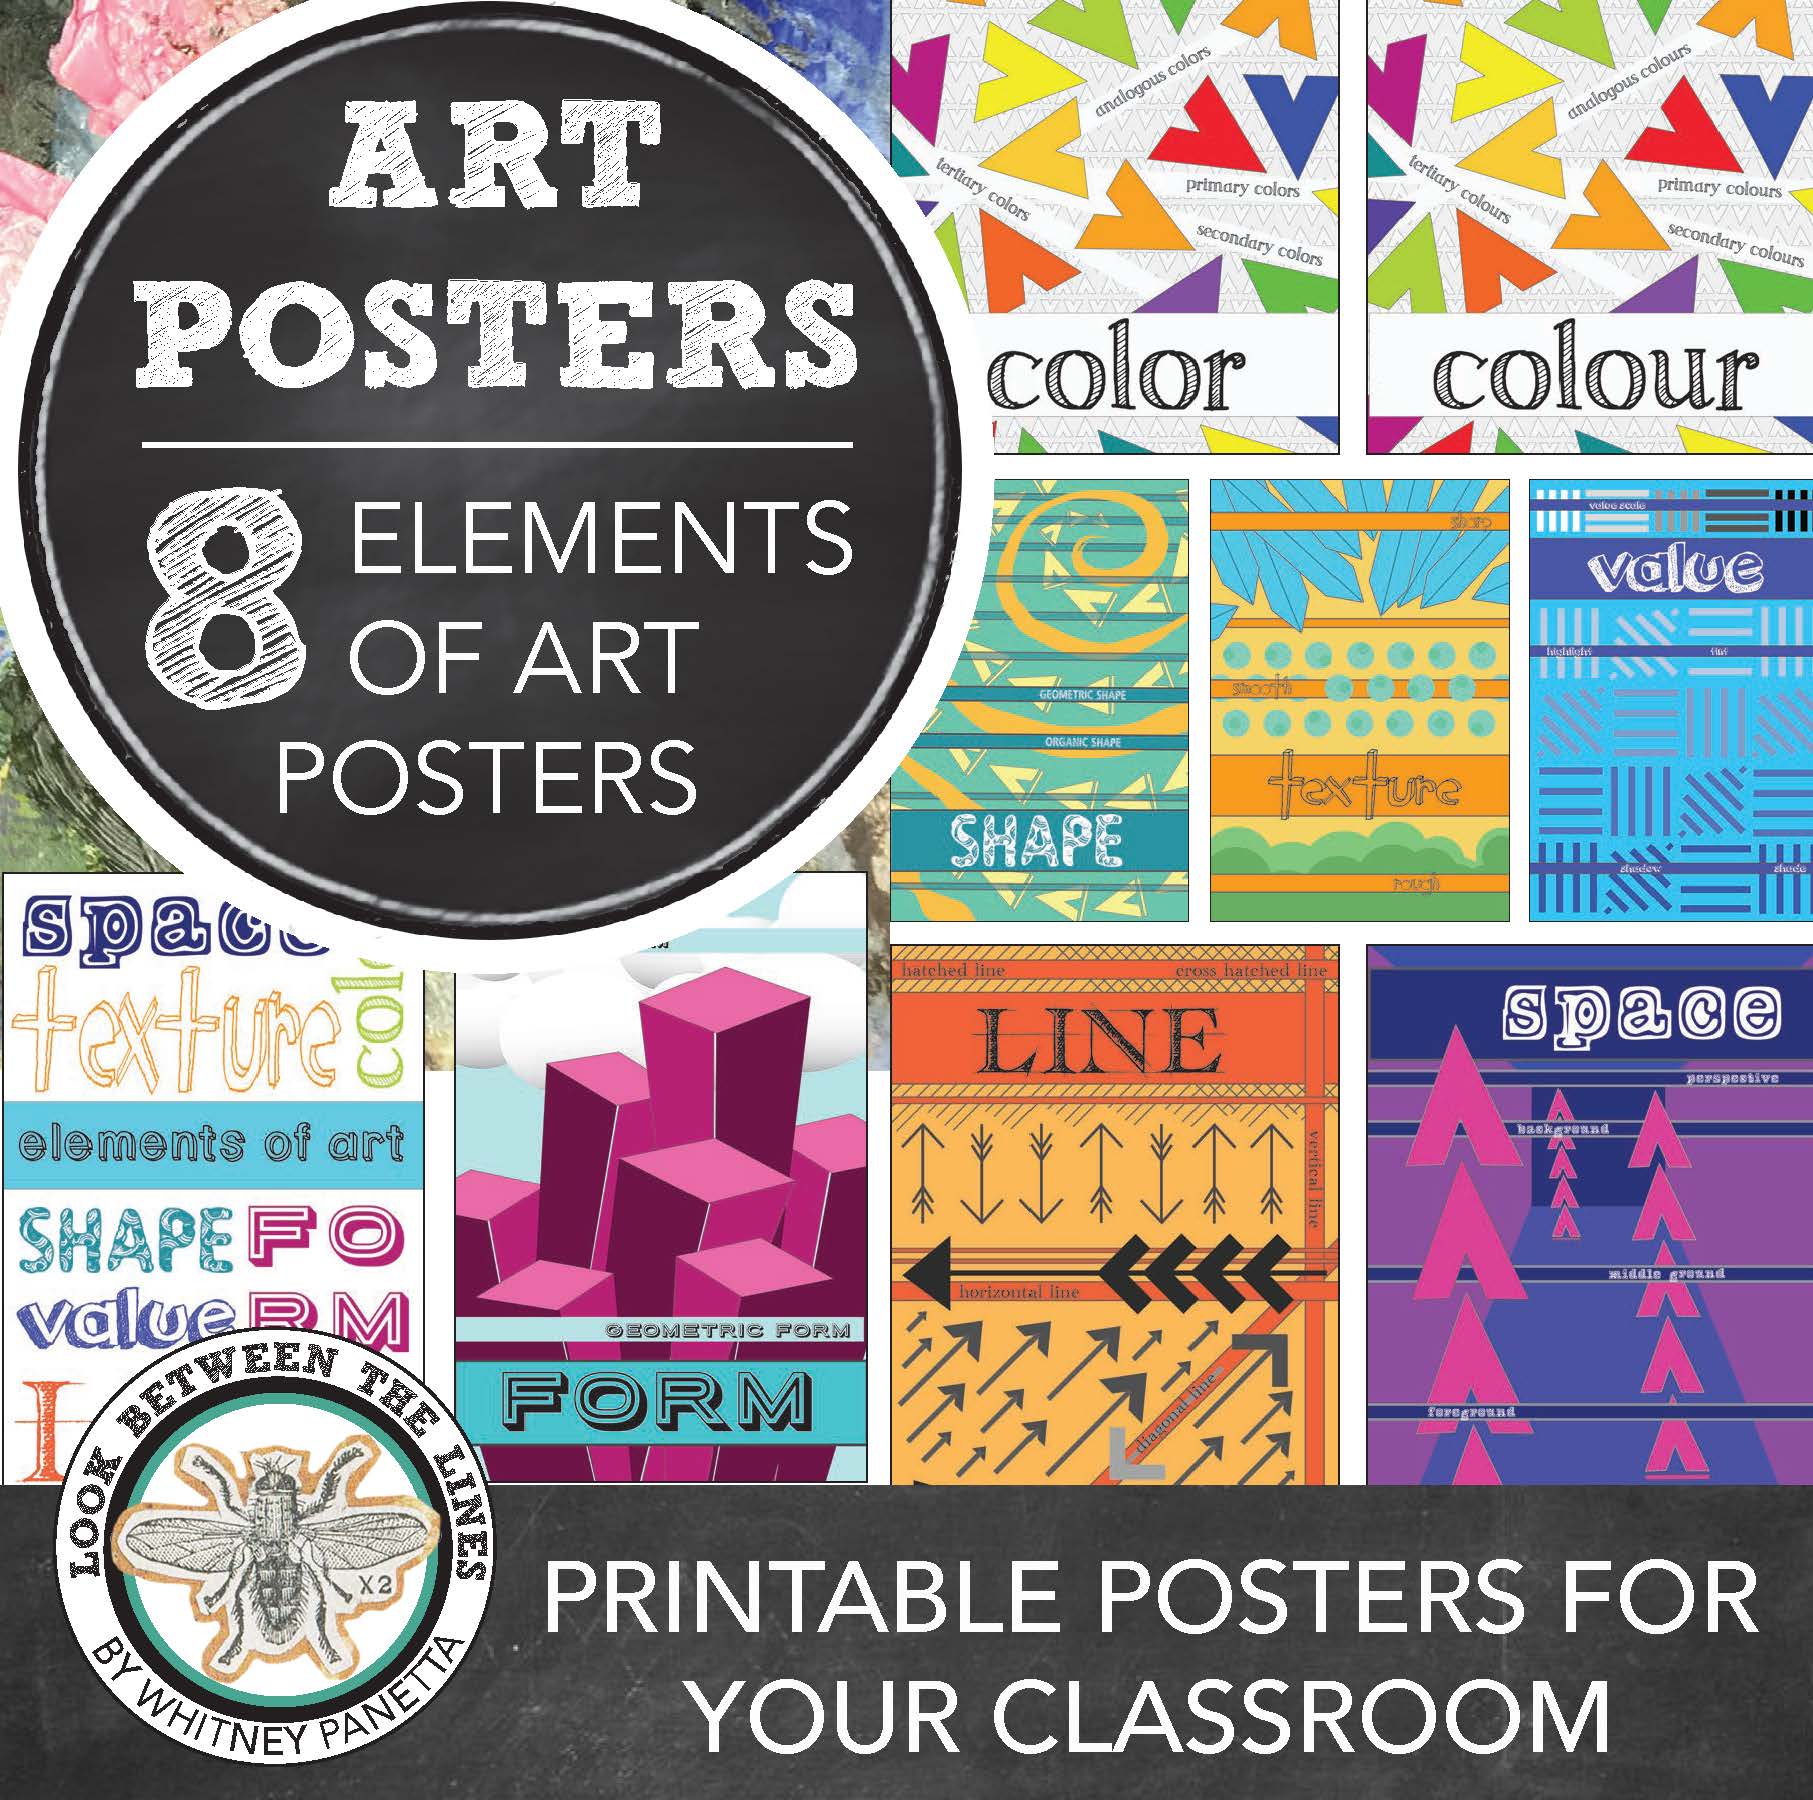 8 Elements of Art Modern Poster Packet - Look between the lines